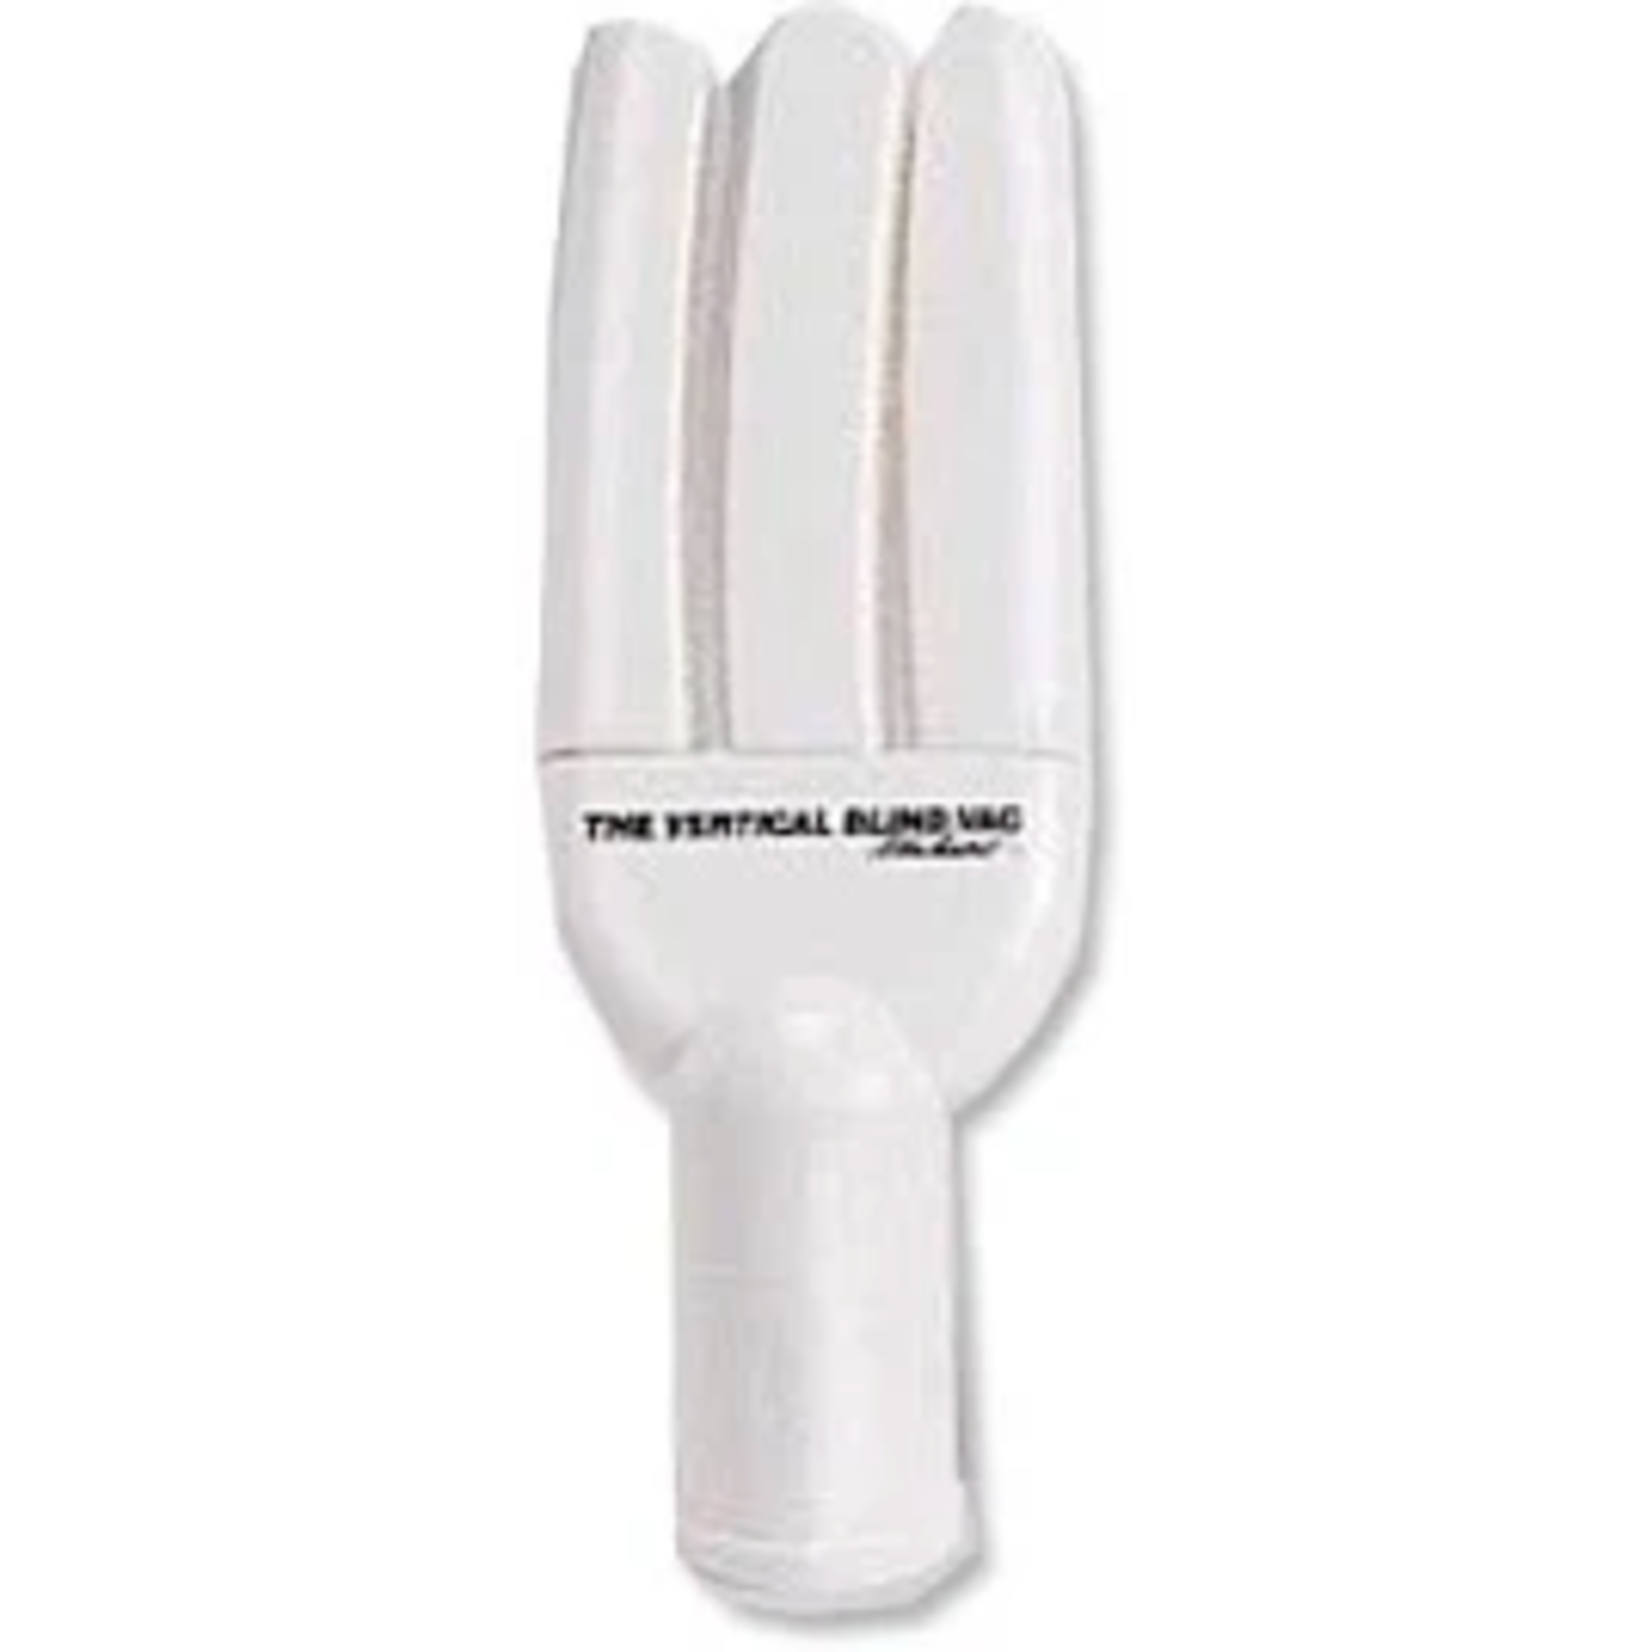 Generic Central Vacuum Vertical Blind Cleaner *No Longer Available*